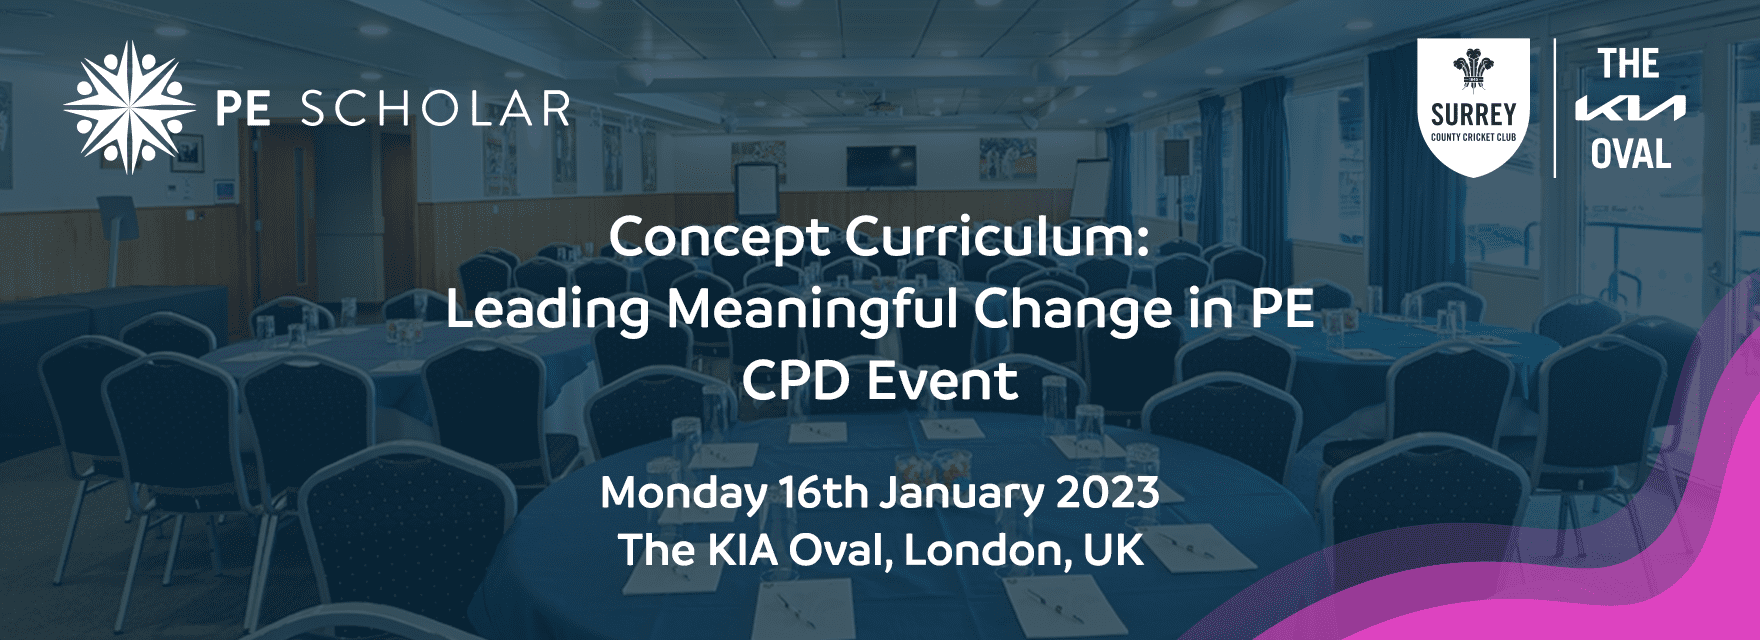 Featured image for “Concept Curriculum: Leading Meaningful Change in PE CPD at The KIA Oval, Jan 2023”